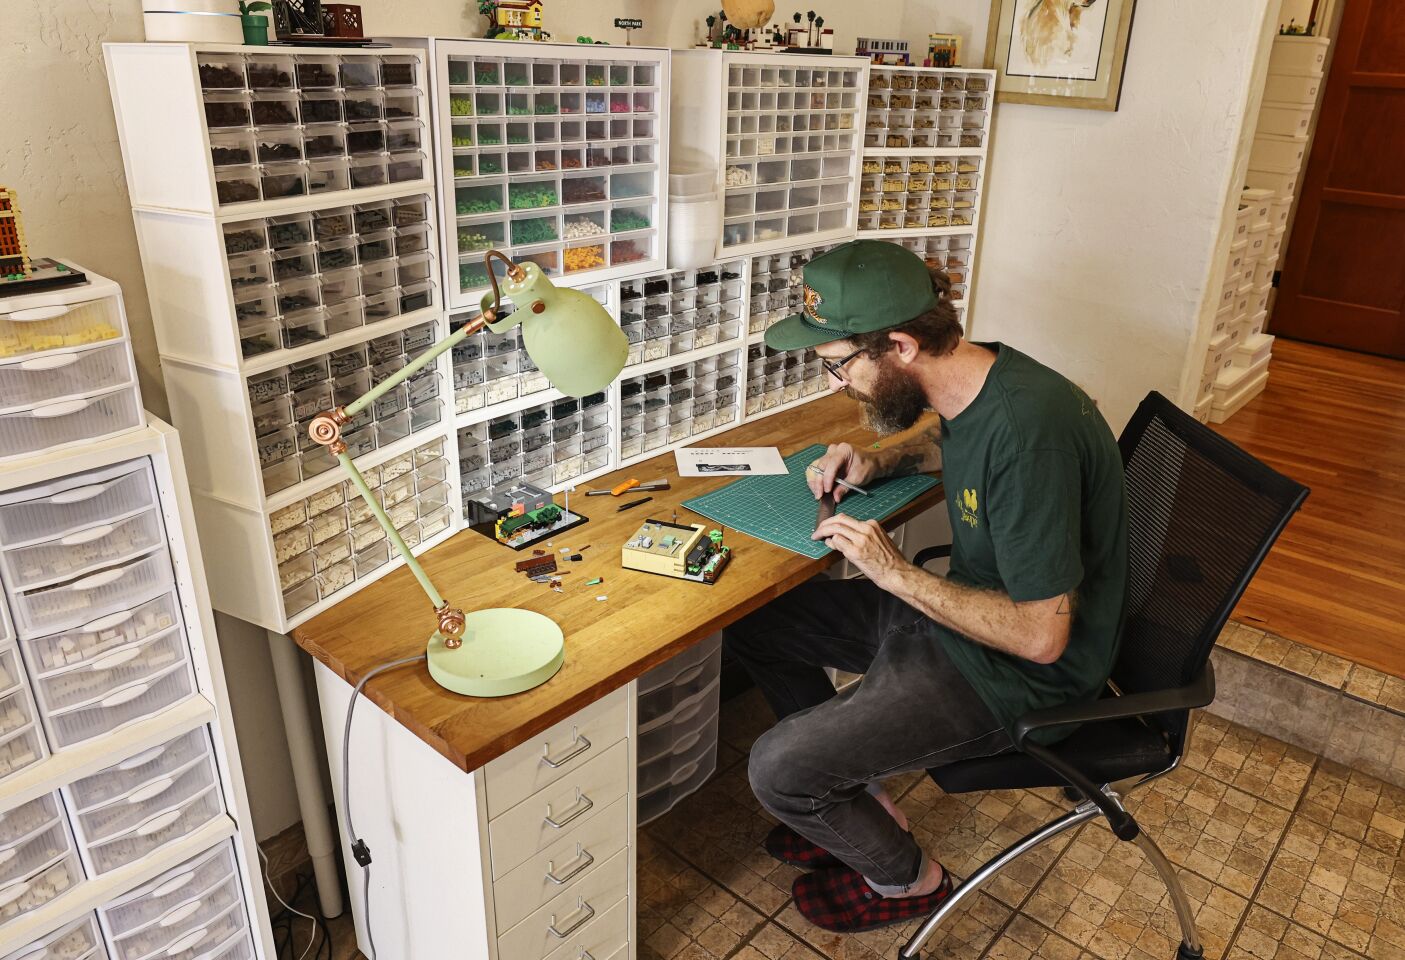 Lego artist Ben Smith works on his recreation of a North Park restaurant called Cori Trattoria Pastificio at his North Park home on Wednesday, July 20, 2022.